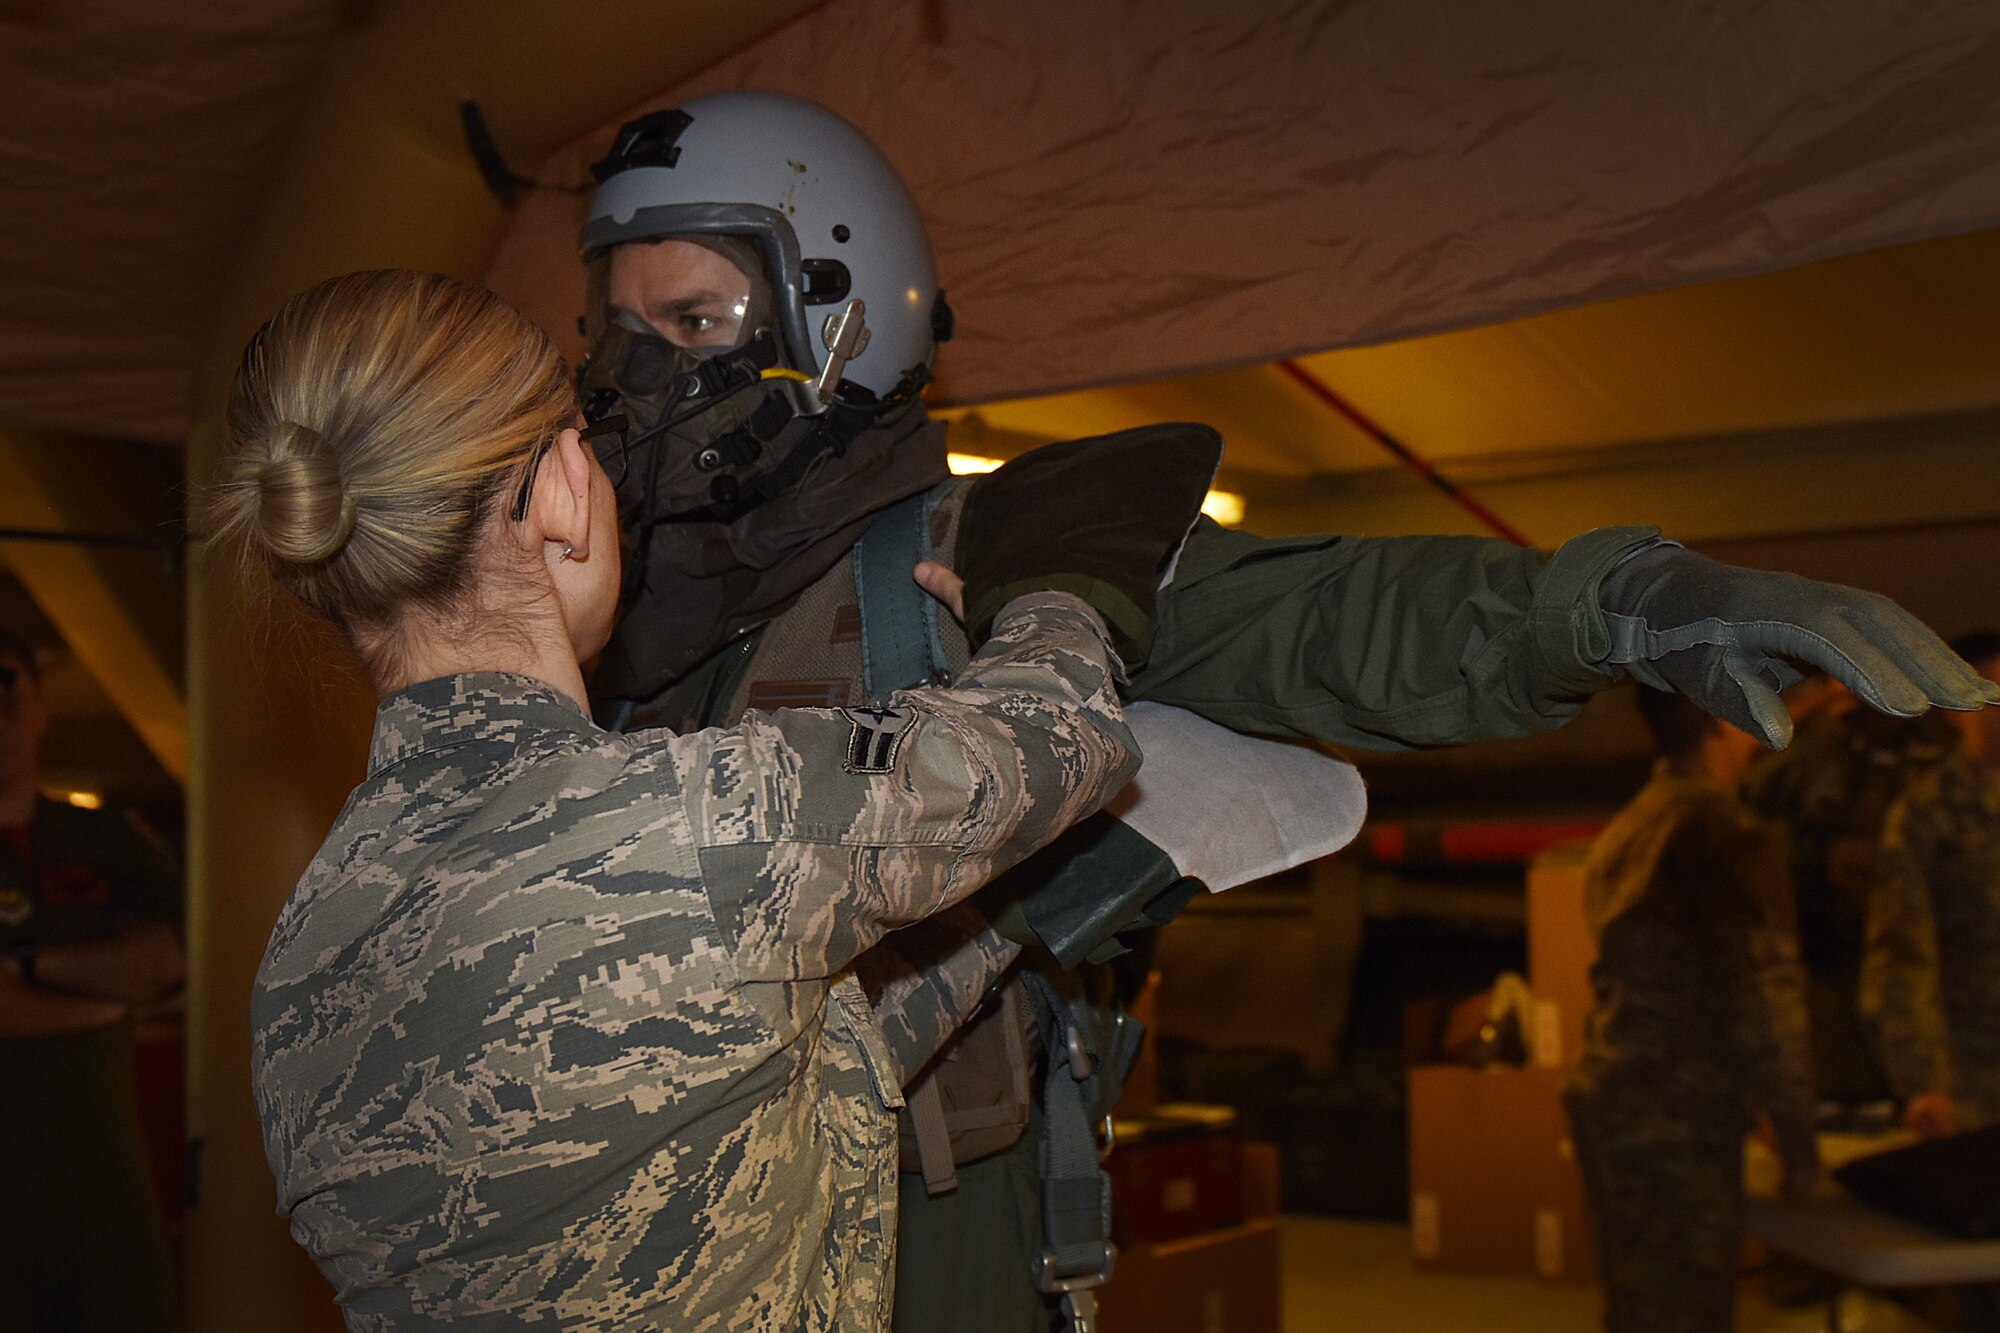 Capt. Erling German walks through decontamination procedures during an Aircrew Contamination Control Area training exercise at Royal Air Force Lakenheath, England, Feb. 21, 2020. The training is conducted to ensure aircrews can maintain mission readiness under any adverse conditions. (U.S. Air Force photo by Airman 1st Class Jessi Monte)